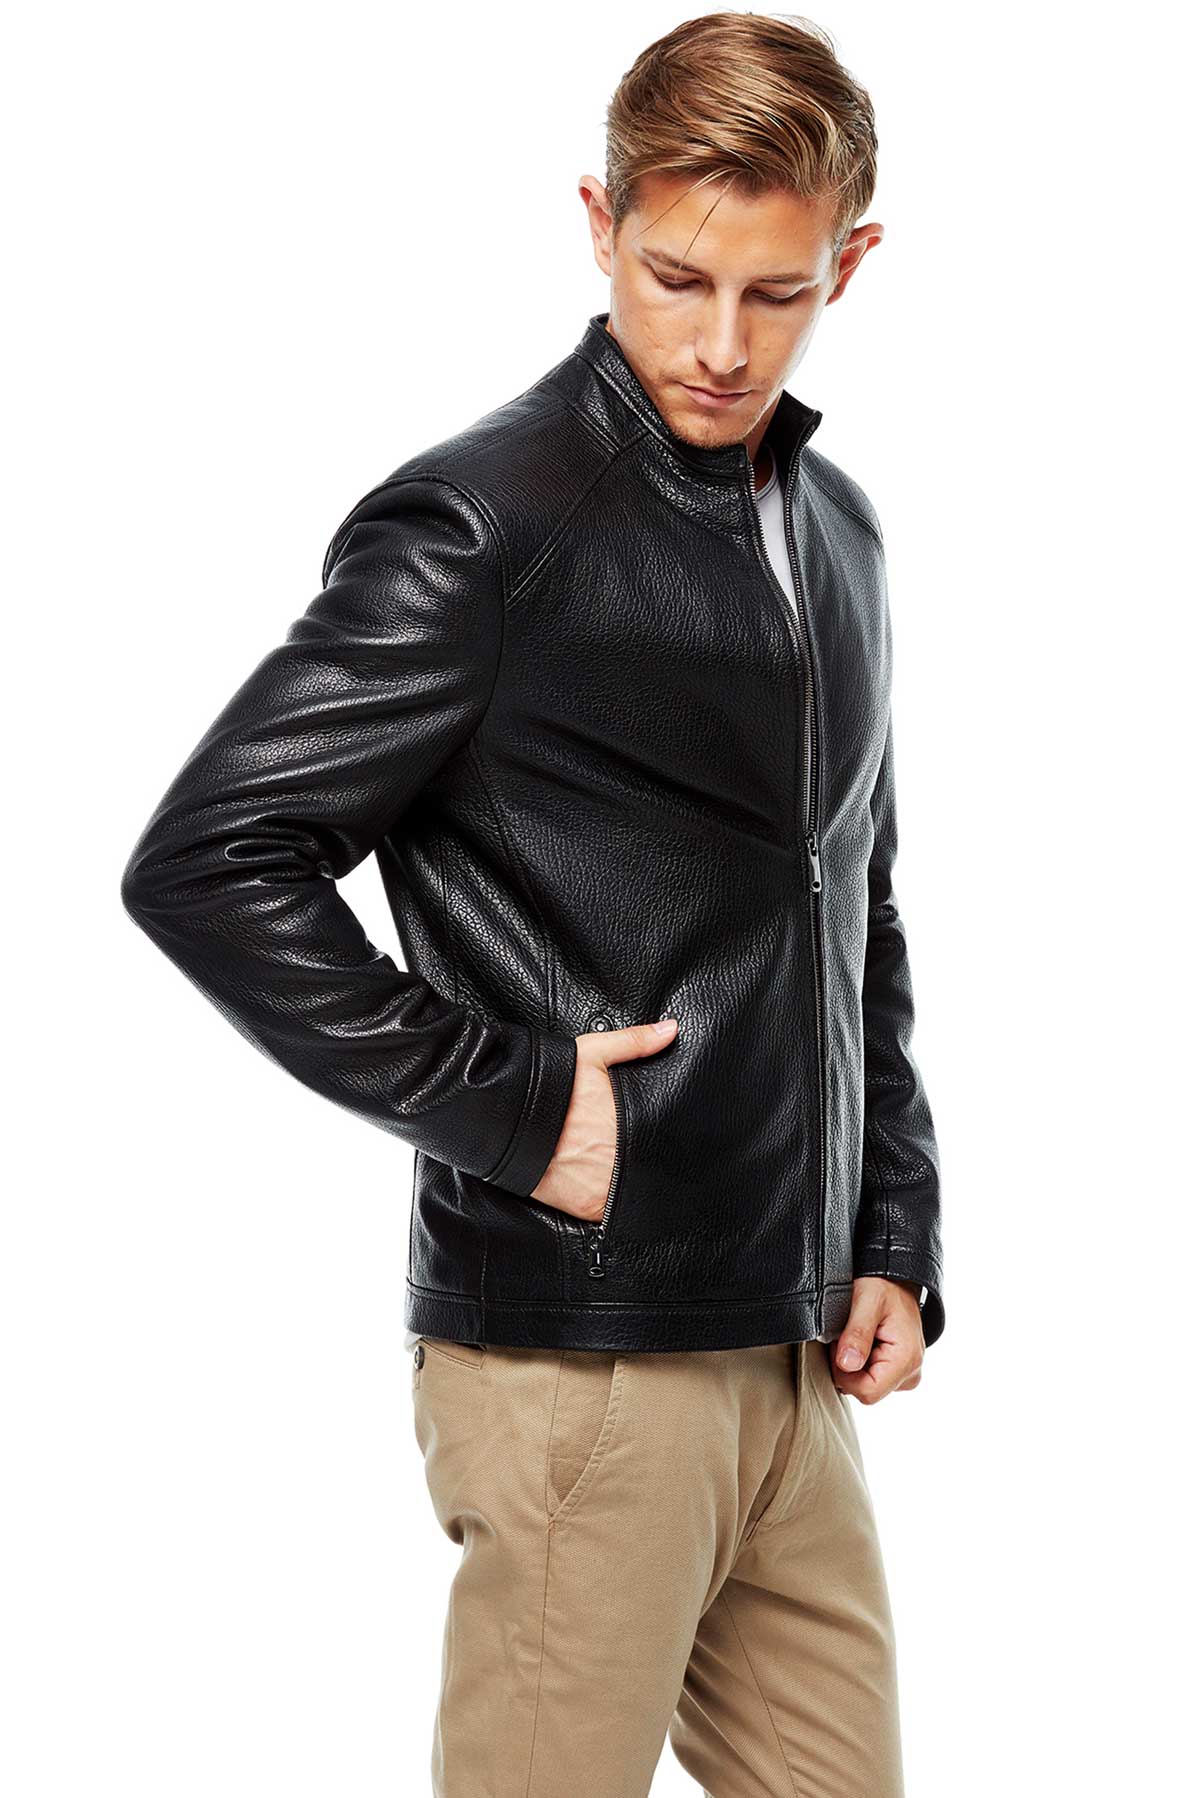 real leather jacket mens